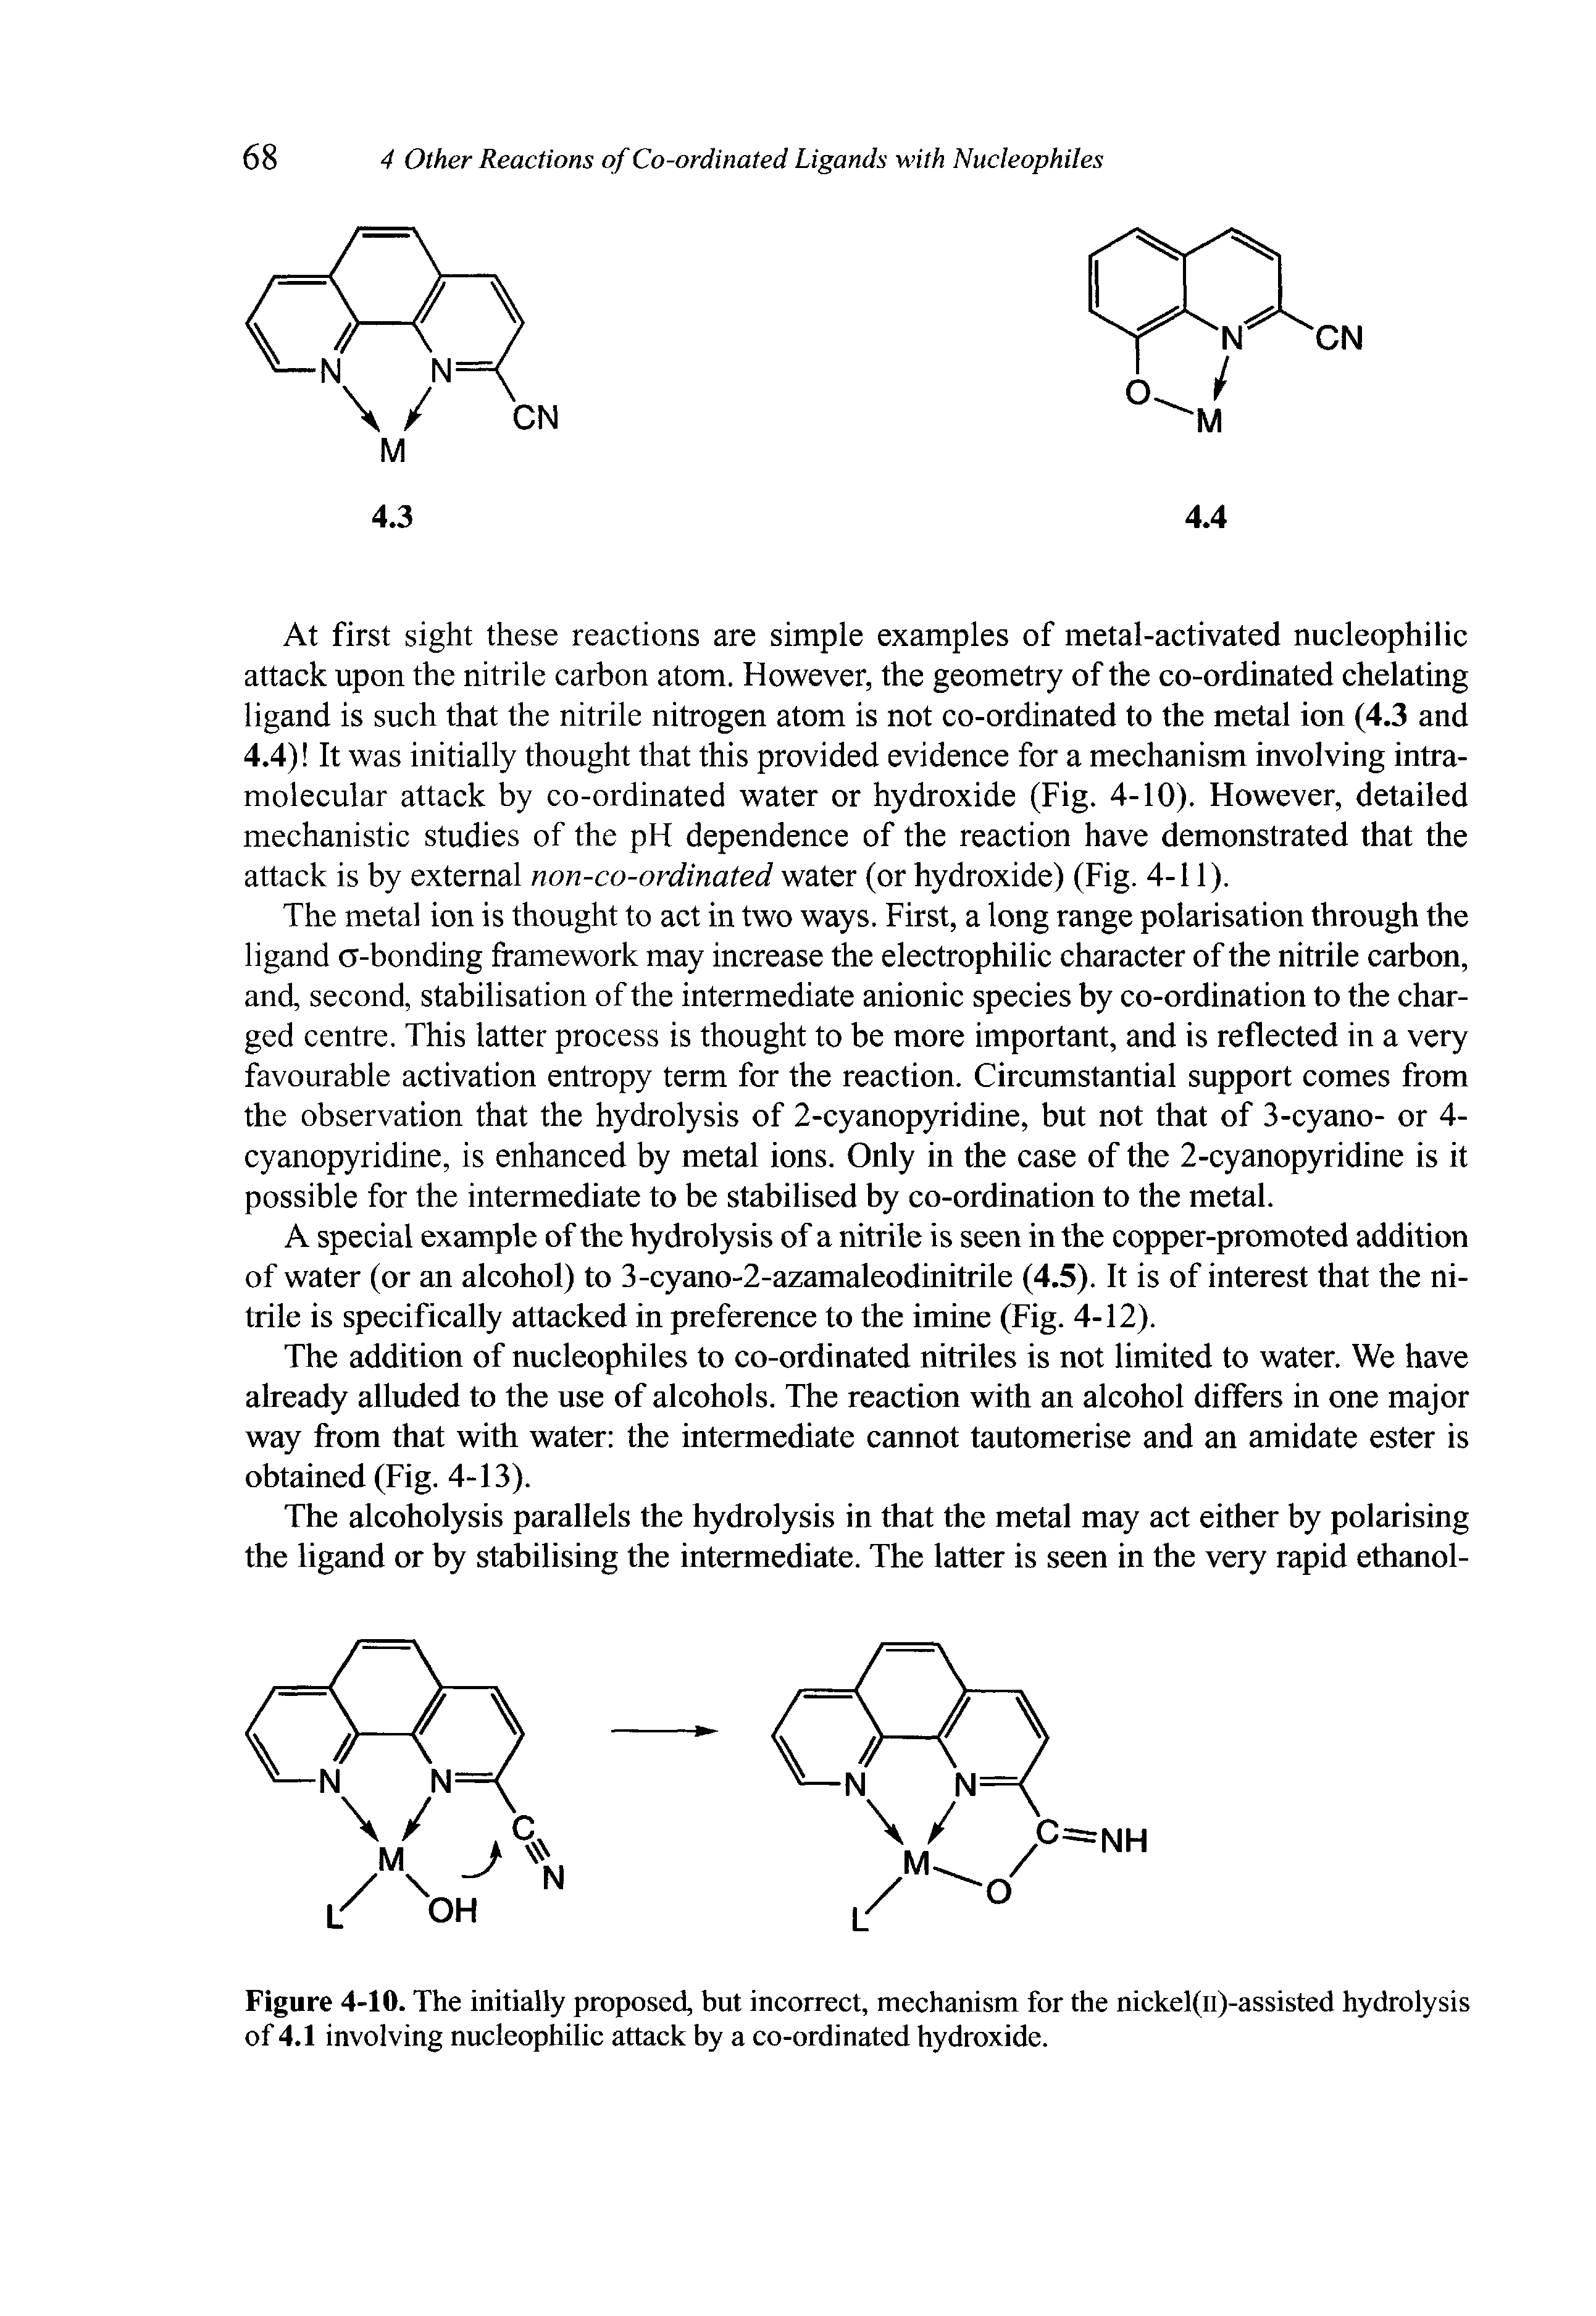 Figure 4-10. The initially proposed, but incorrect, mechanism for the nickel(n)-assisted hydrolysis of 4.1 involving nucleophilic attack by a co-ordinated hydroxide.